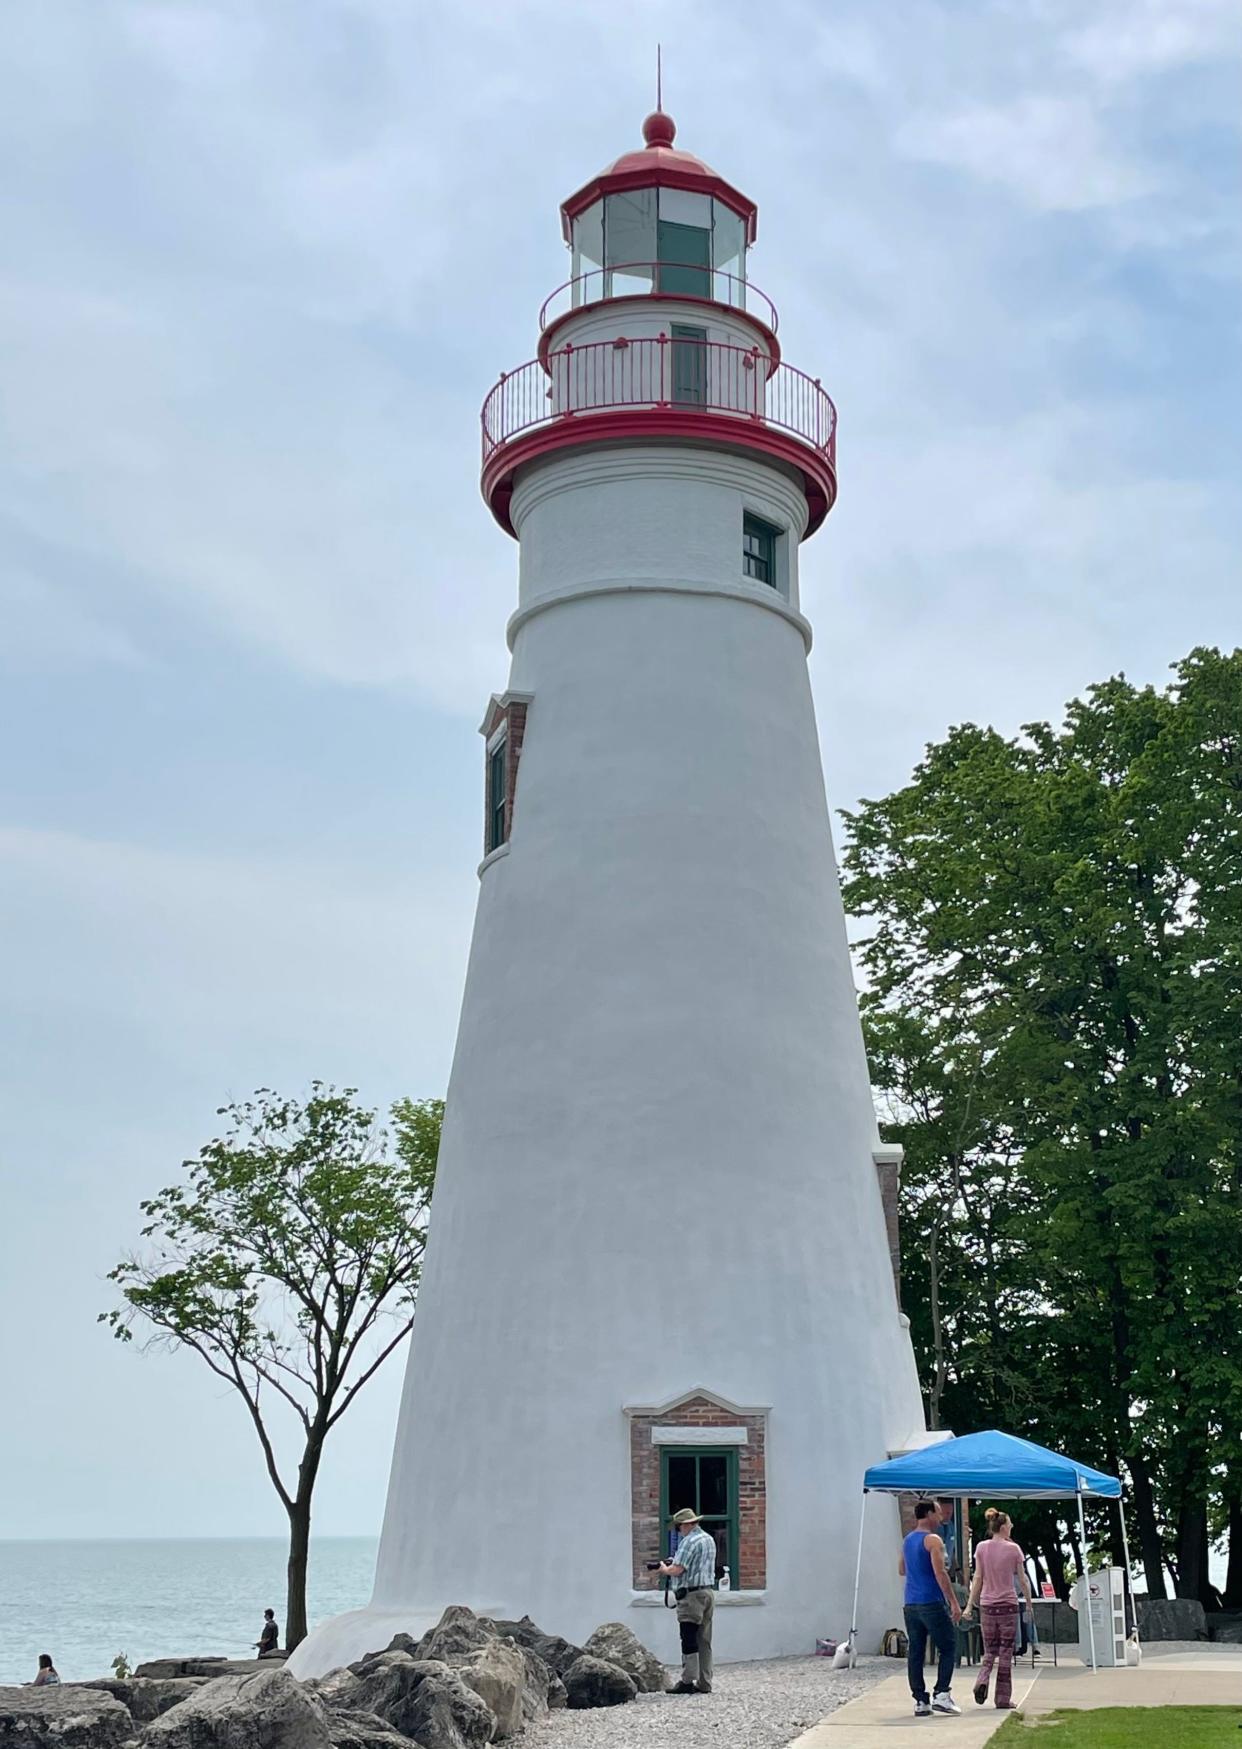 Picturesque Marblehead Lighthouse has been guiding sailors for 200 years.